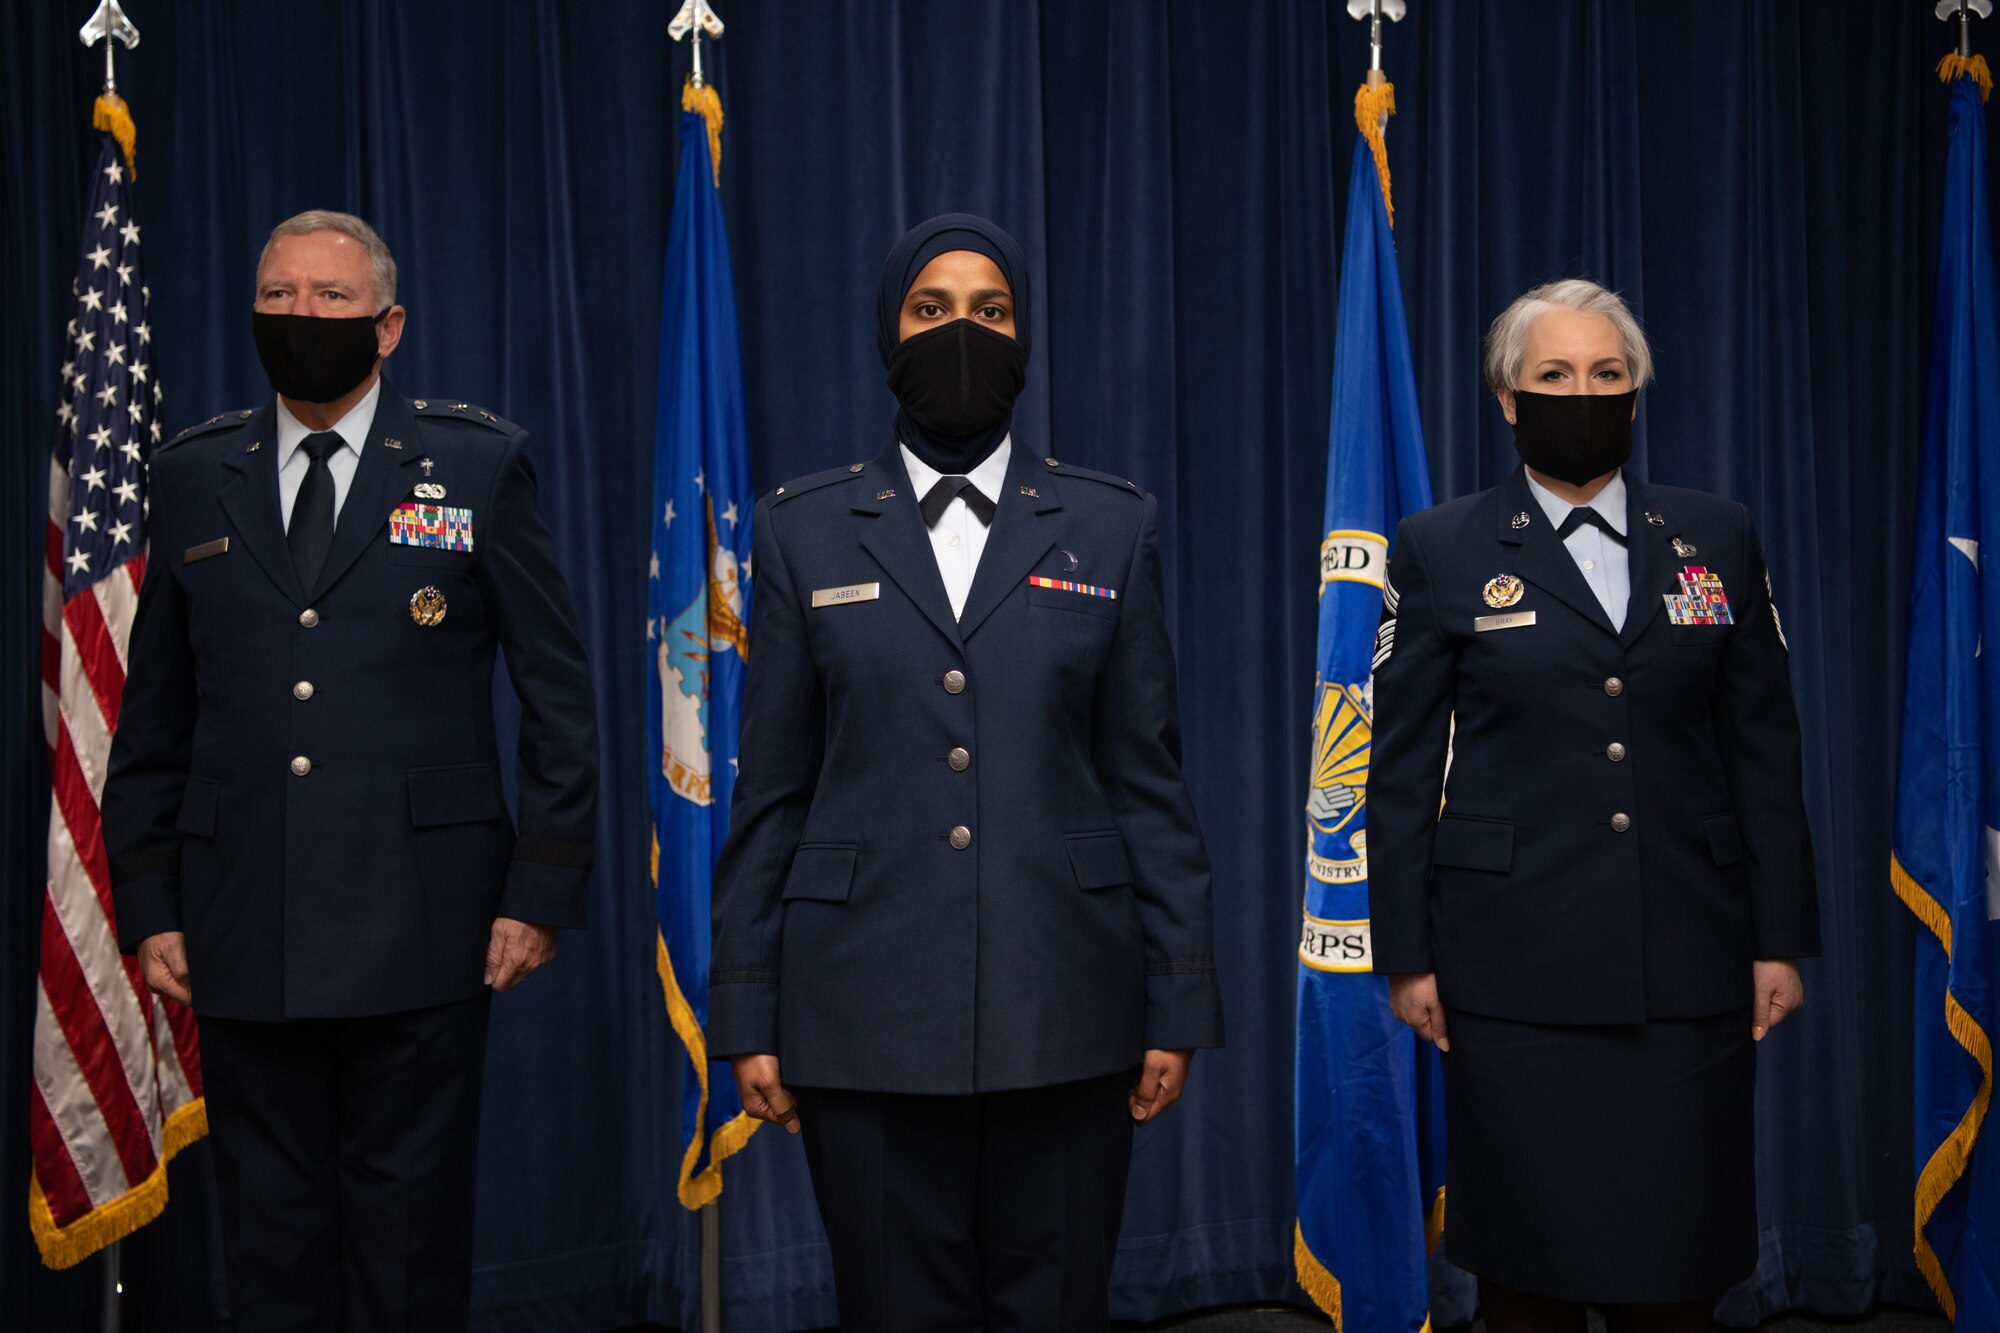 Maj. Gen. Steven Schaik, Air Force chief of chaplains, 1st Lt. Saleha Jabeen, a graduate of Basic Chaplain Course Class 21A, and Chief Master Sgt. Natalie Gray, Air Force Chaplain Corps senior enlisted advisor and religious affairs career field manager, pose for a photo during the graduation ceremony Feb. 5, 2021, at the Ira C. Eaker Center for Leadership Development on Maxwell Air Force Base, Ala. Schaik and Gray congratulated each graduate of the Basic Chaplain Course onstage as they received their chaplain coin.